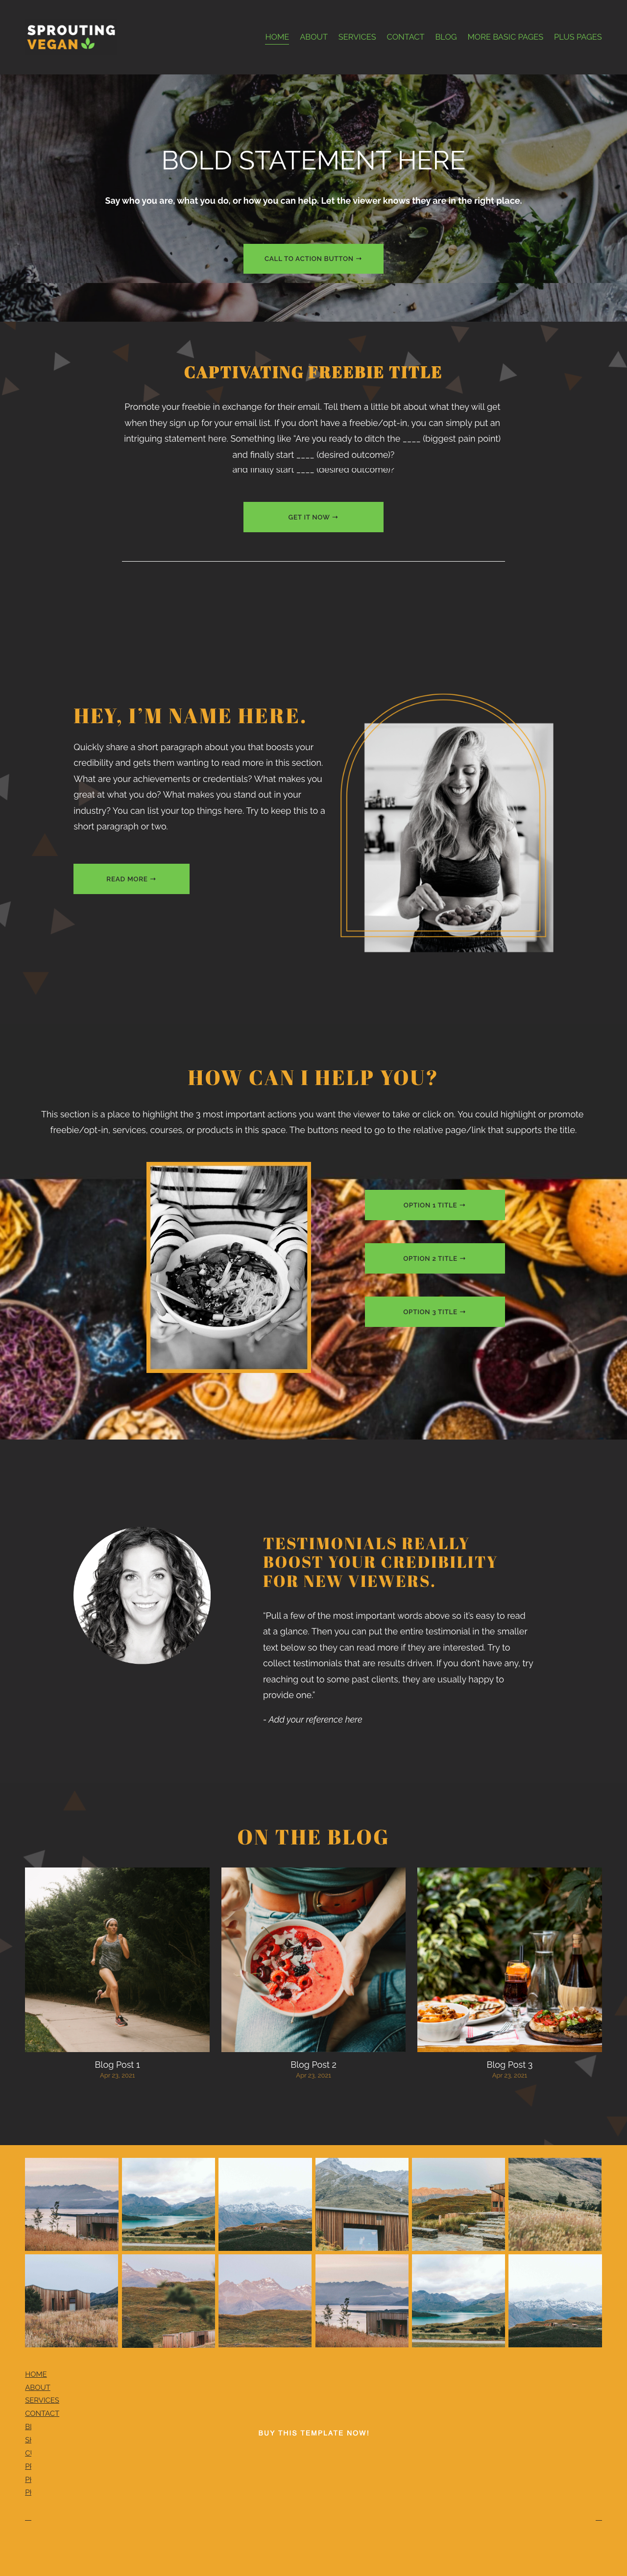 screencapture-template-sprouting-vegan-71-5-squarespace-home-2023-03-01-17_23_34.png